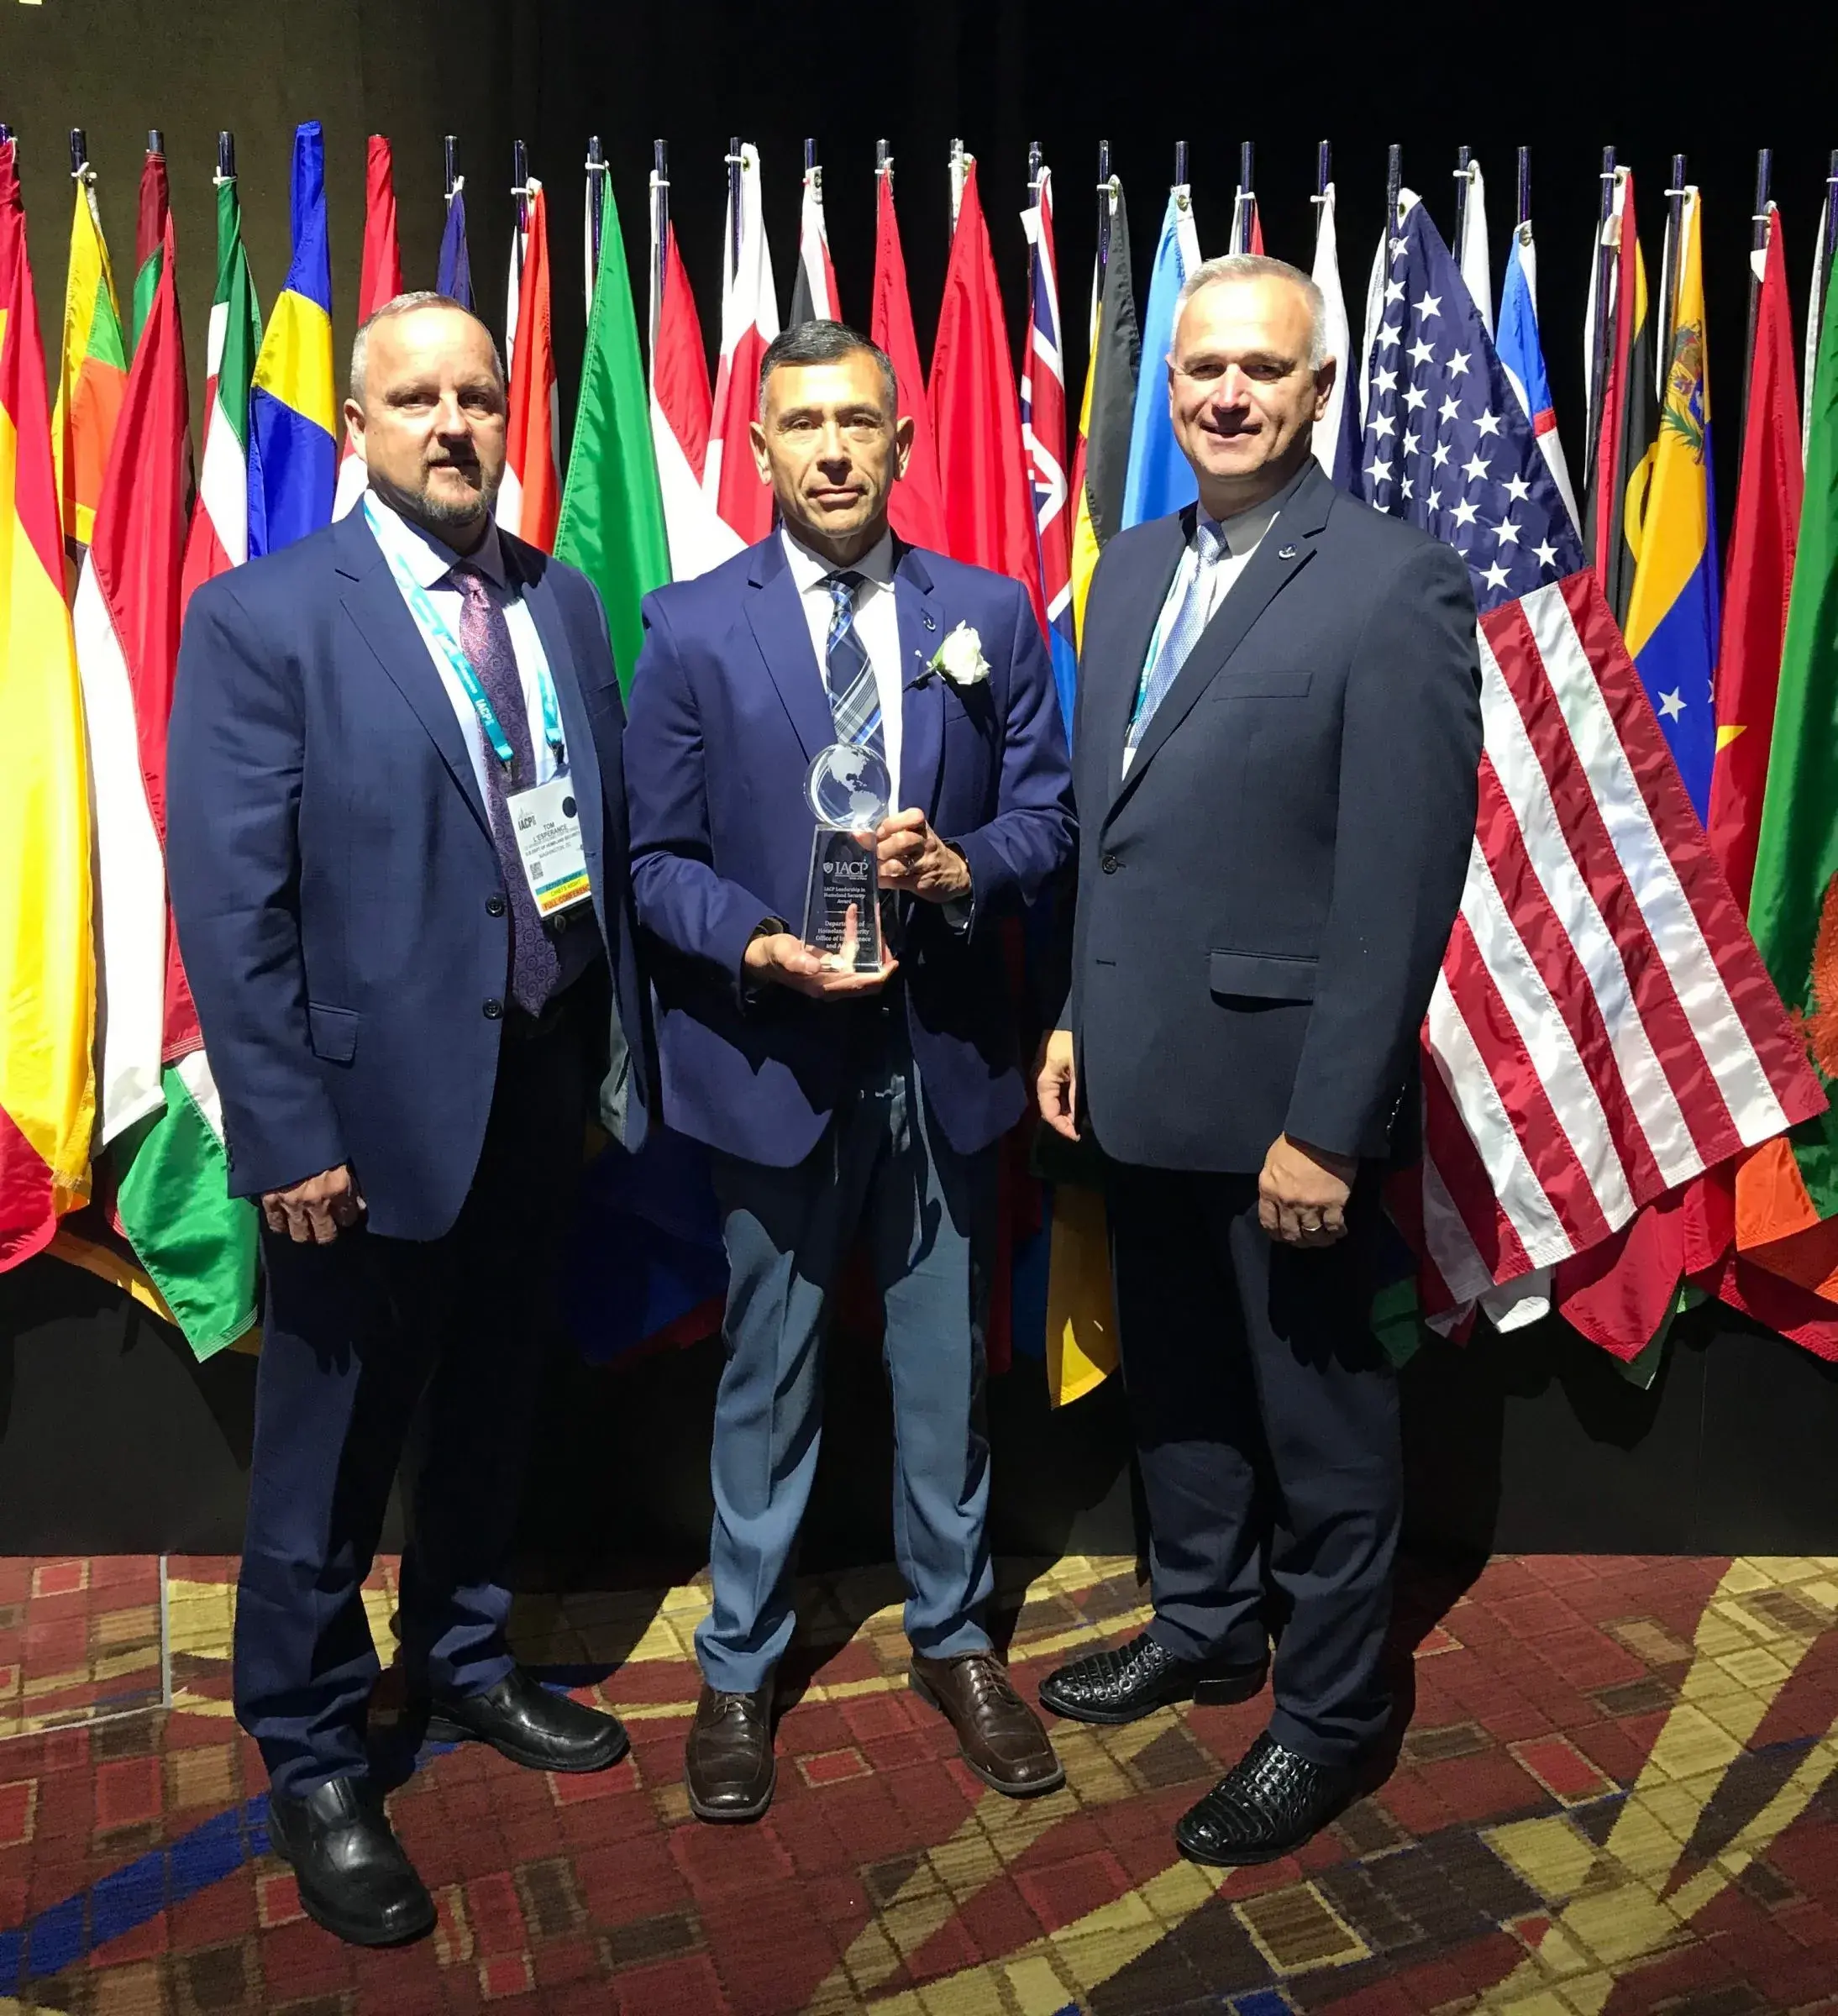 (From left) DHS Office of Intelligence and Analysis Law Enforcement Advisor Tom L'Esperance, Major David Cabrera of the Texas Department of Public Safety (DPS) Intelligence and Counterterrorism Division, and Texas DPS Intelligence and Counterterrorism Division Chief Dale Avant jointly accepted the International Association of Chiefs of Police 2019 Leadership in Homeland Security Award.